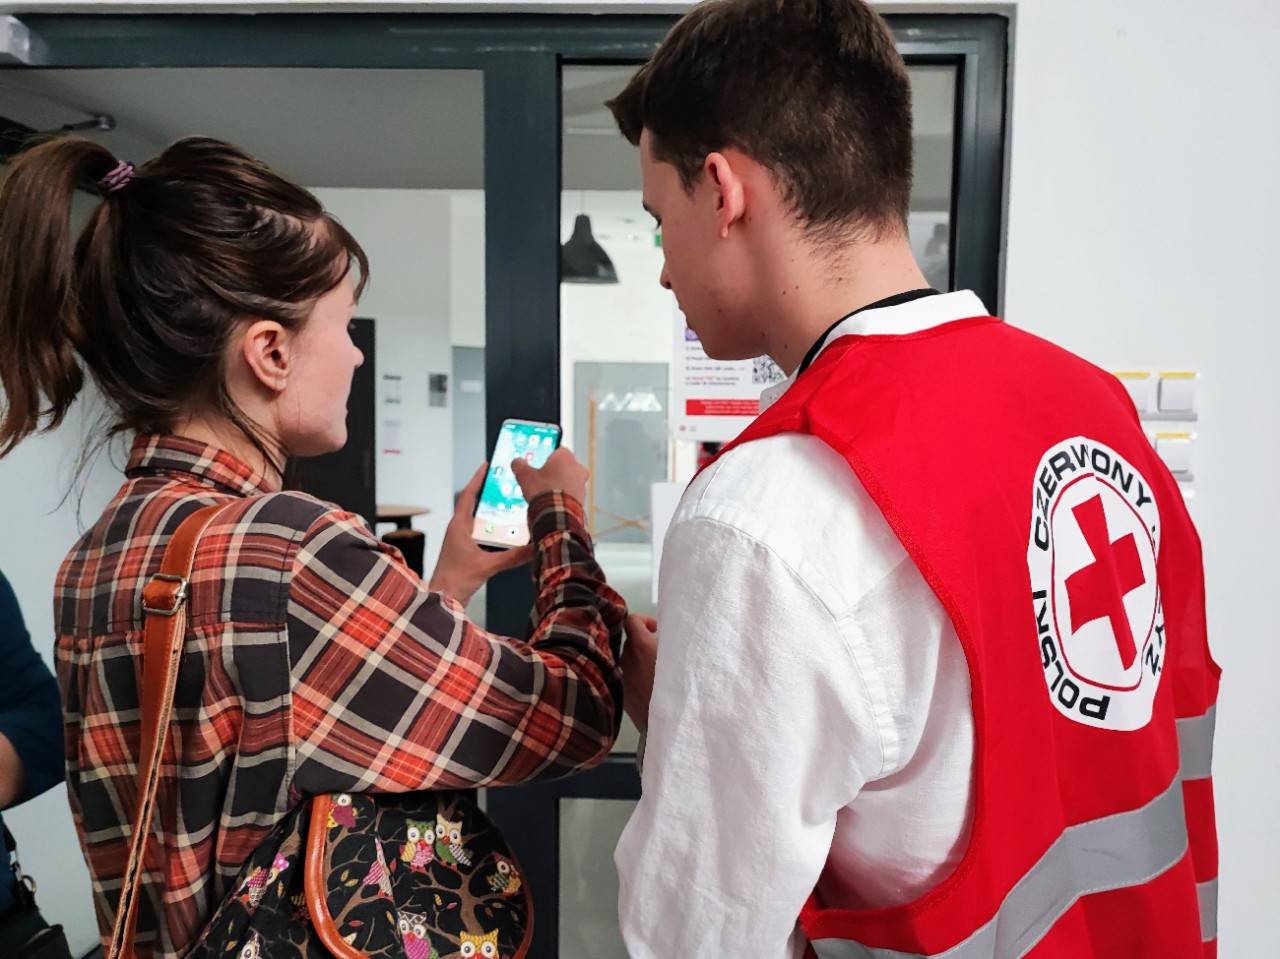 May 13, 2022. Warsaw, Poland, Volunteers of Polish Red Cross and IFRC staff working in a Cash Assistance distribution center. Ukrainian refugees receive information and, after that, they are registered to the program. Friendly spaces for kids and exit surveys are being implemented as part of the project. Photo by Carla Guananga/IFRC